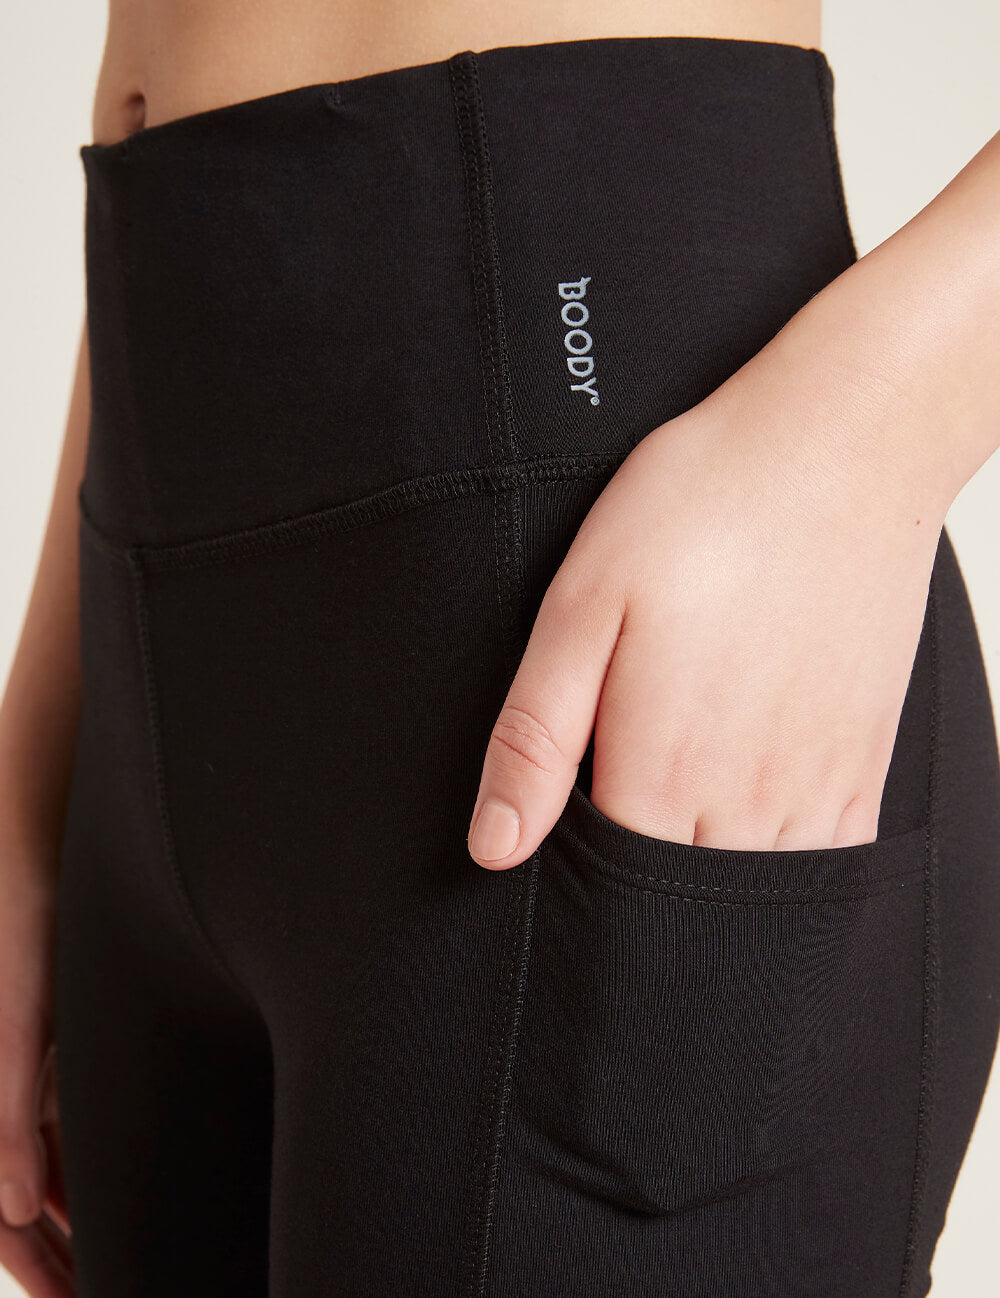 Boody Bamboo Active High-Waisted 5" Exercise Short with Pockets in Black Cell Phone Pocket Detail View